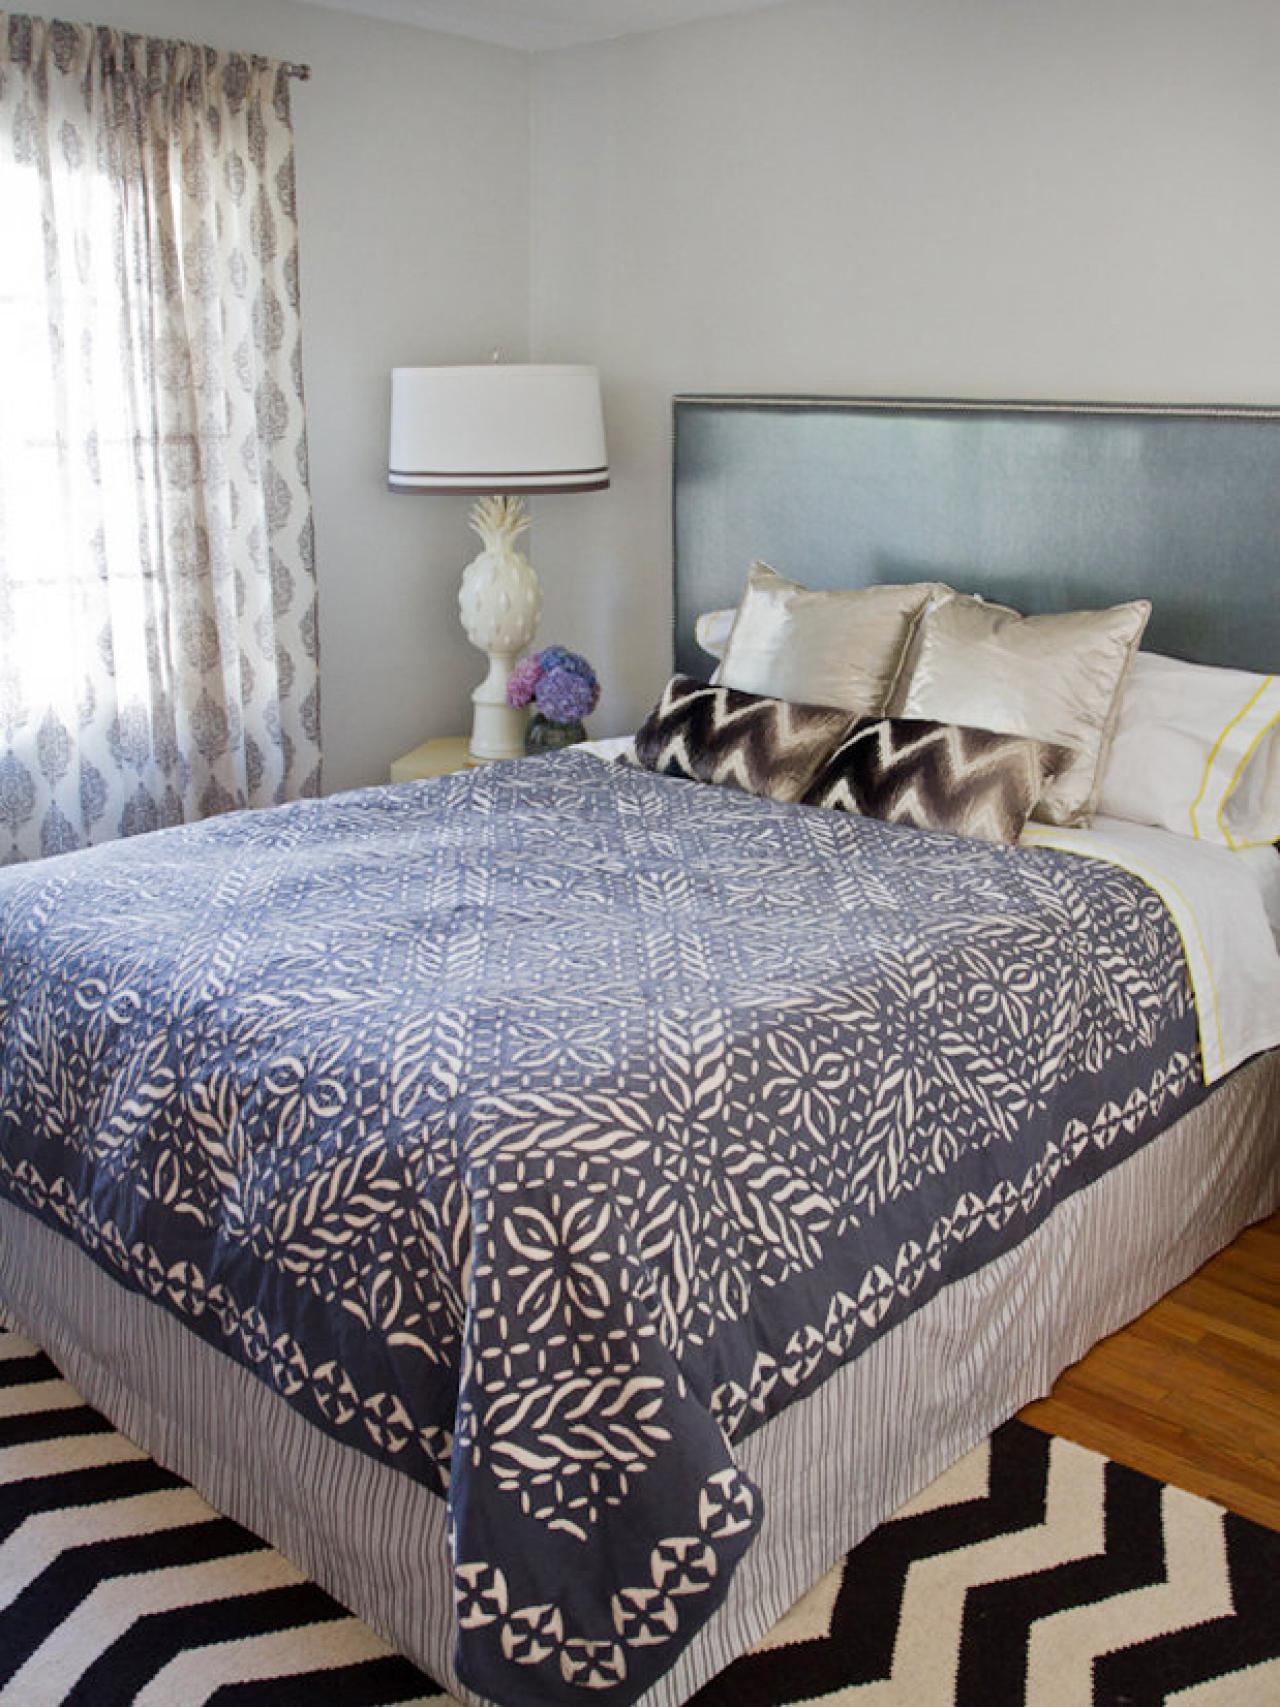 Turn A Coverlet Into Duvet Cover, How To Insert Comforter Into Duvet Cover